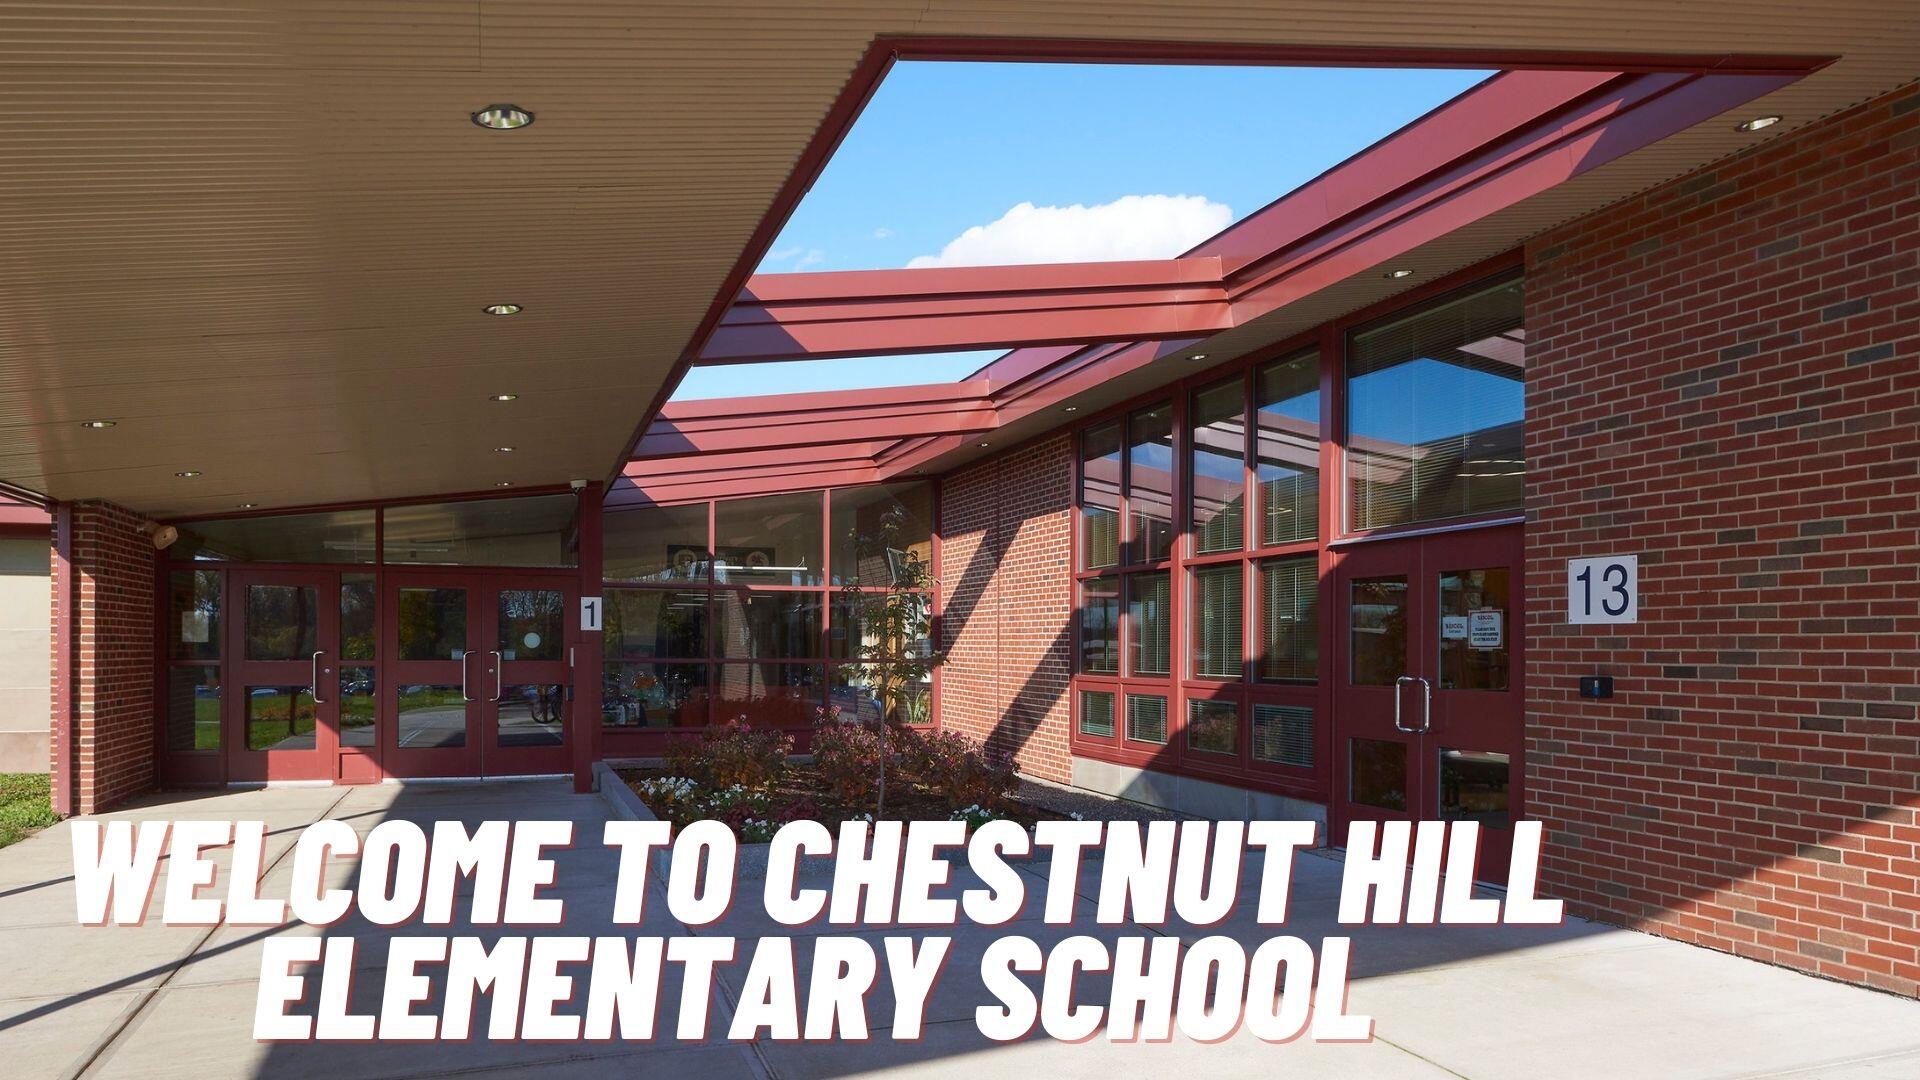 Welcome to Chestnut Hill Elementary